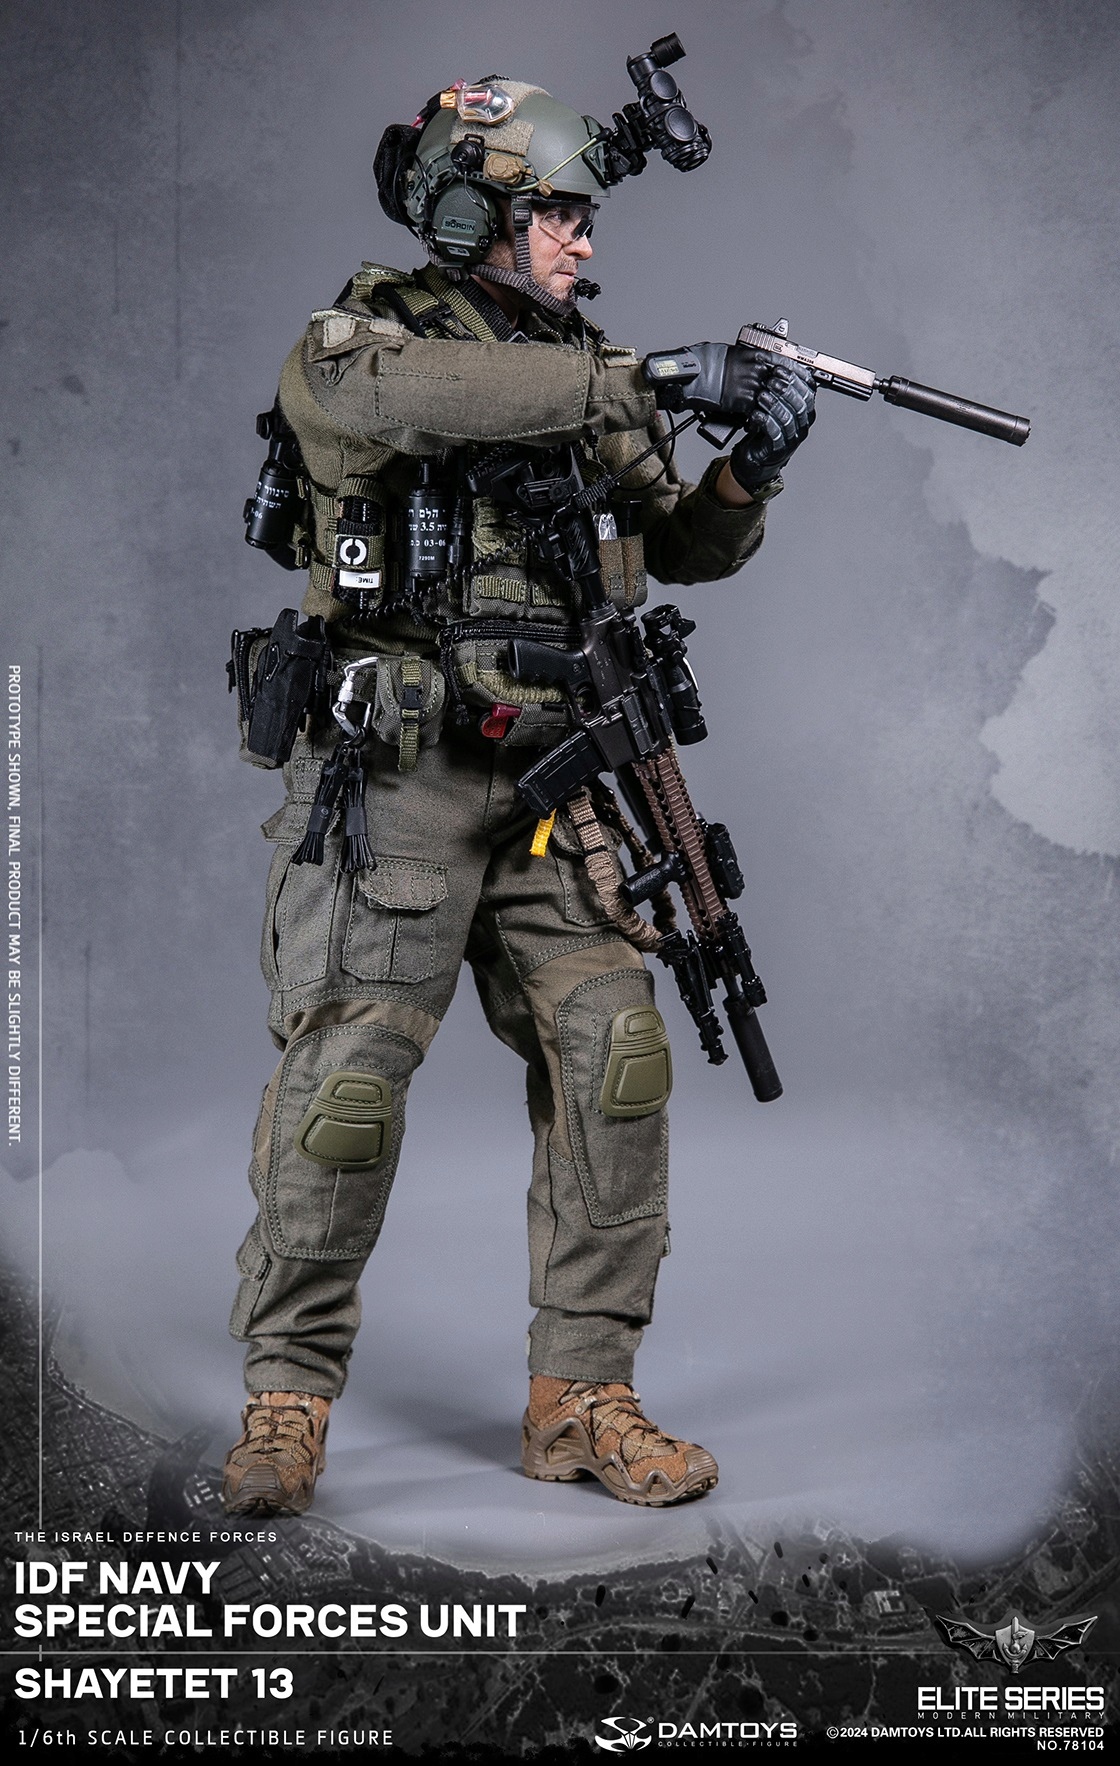 NEW PRODUCT: DAMTOYS - Israeli IDF Naval Special Forces-13th Commando #78104 15200